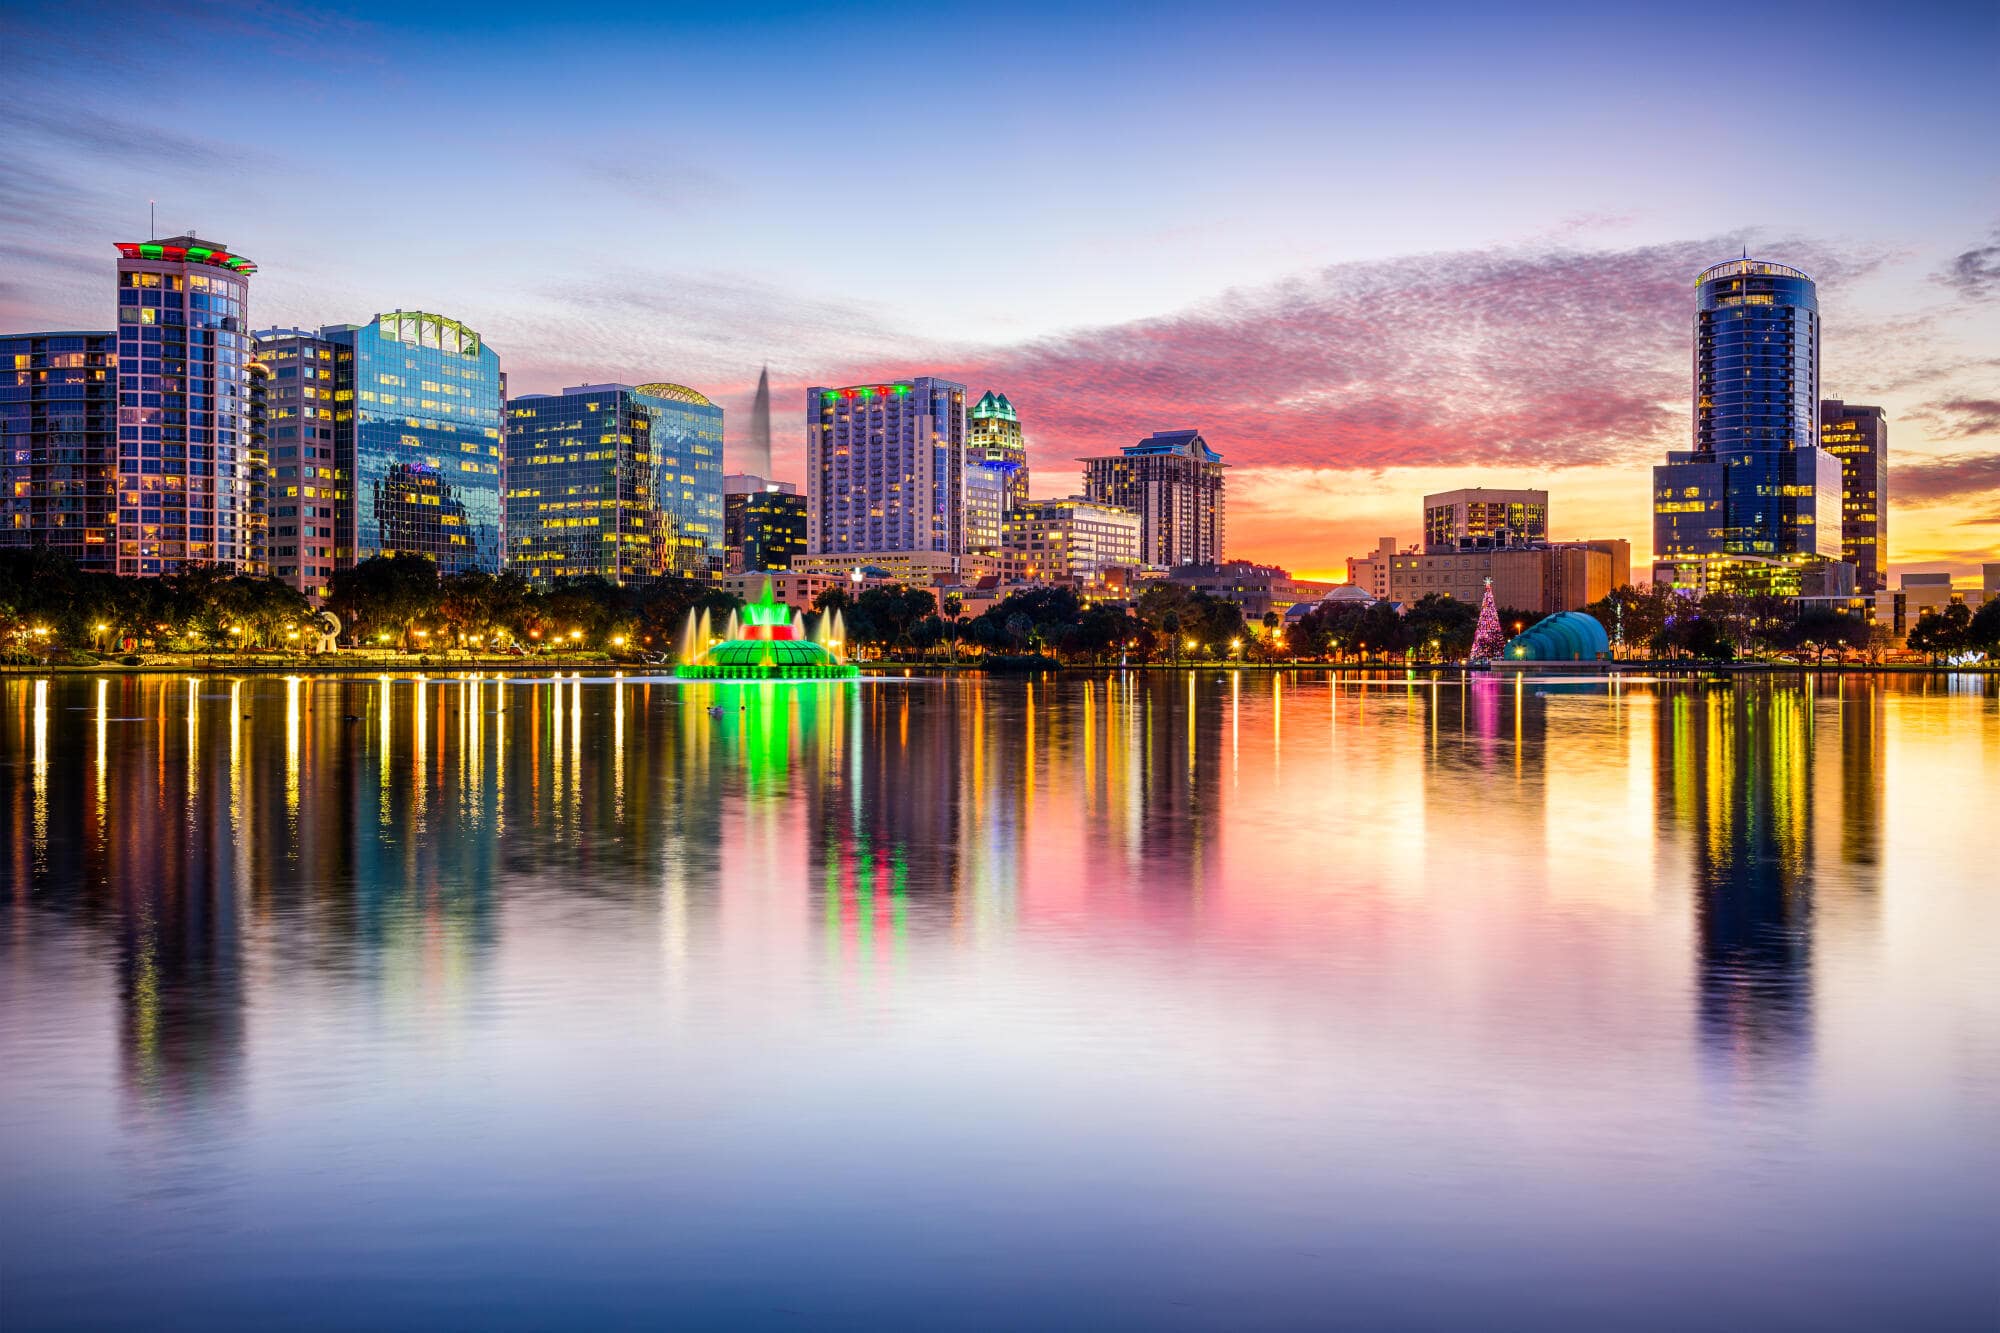 Orlando Summer Vacation Rental: 3 Tips for Making the Most of the High Season